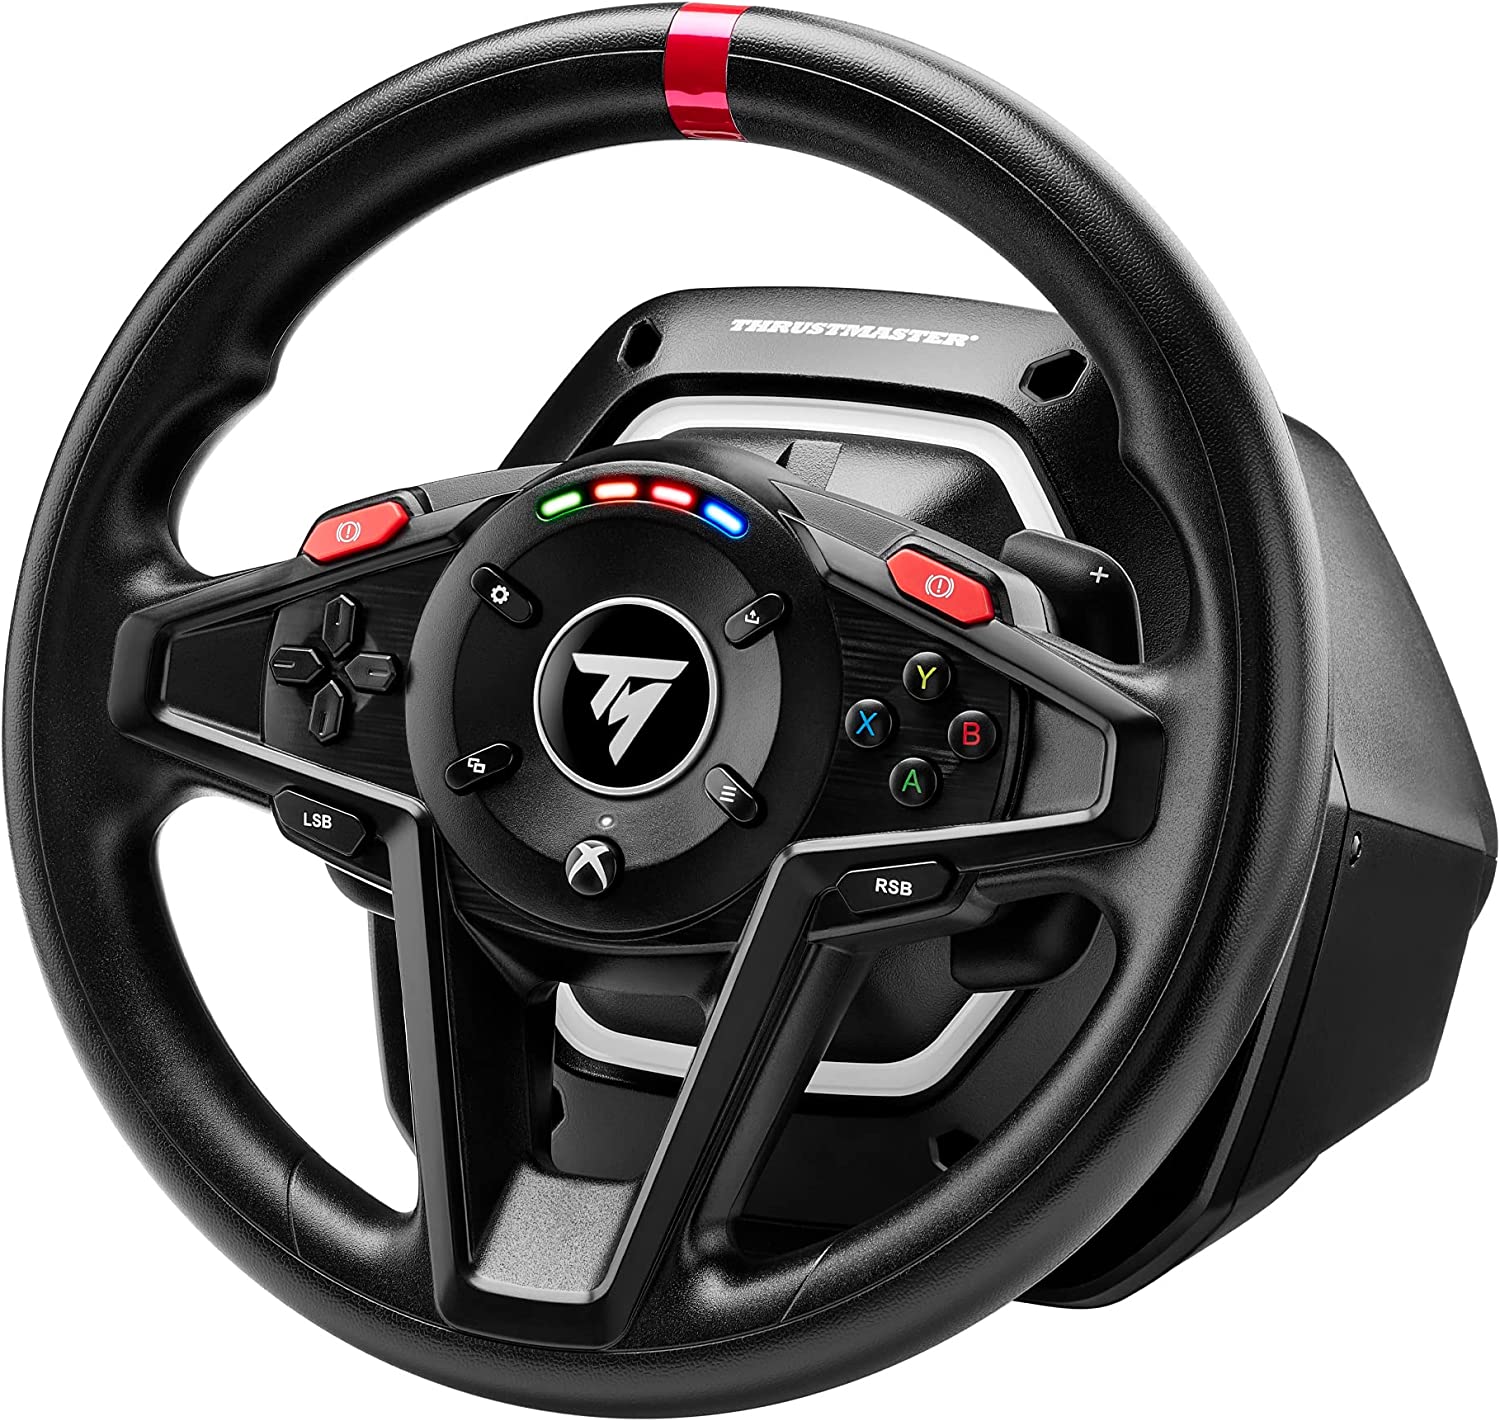 Thrustmaster T248 review: A truly exciting level of feedback from a gaming  steering wheel